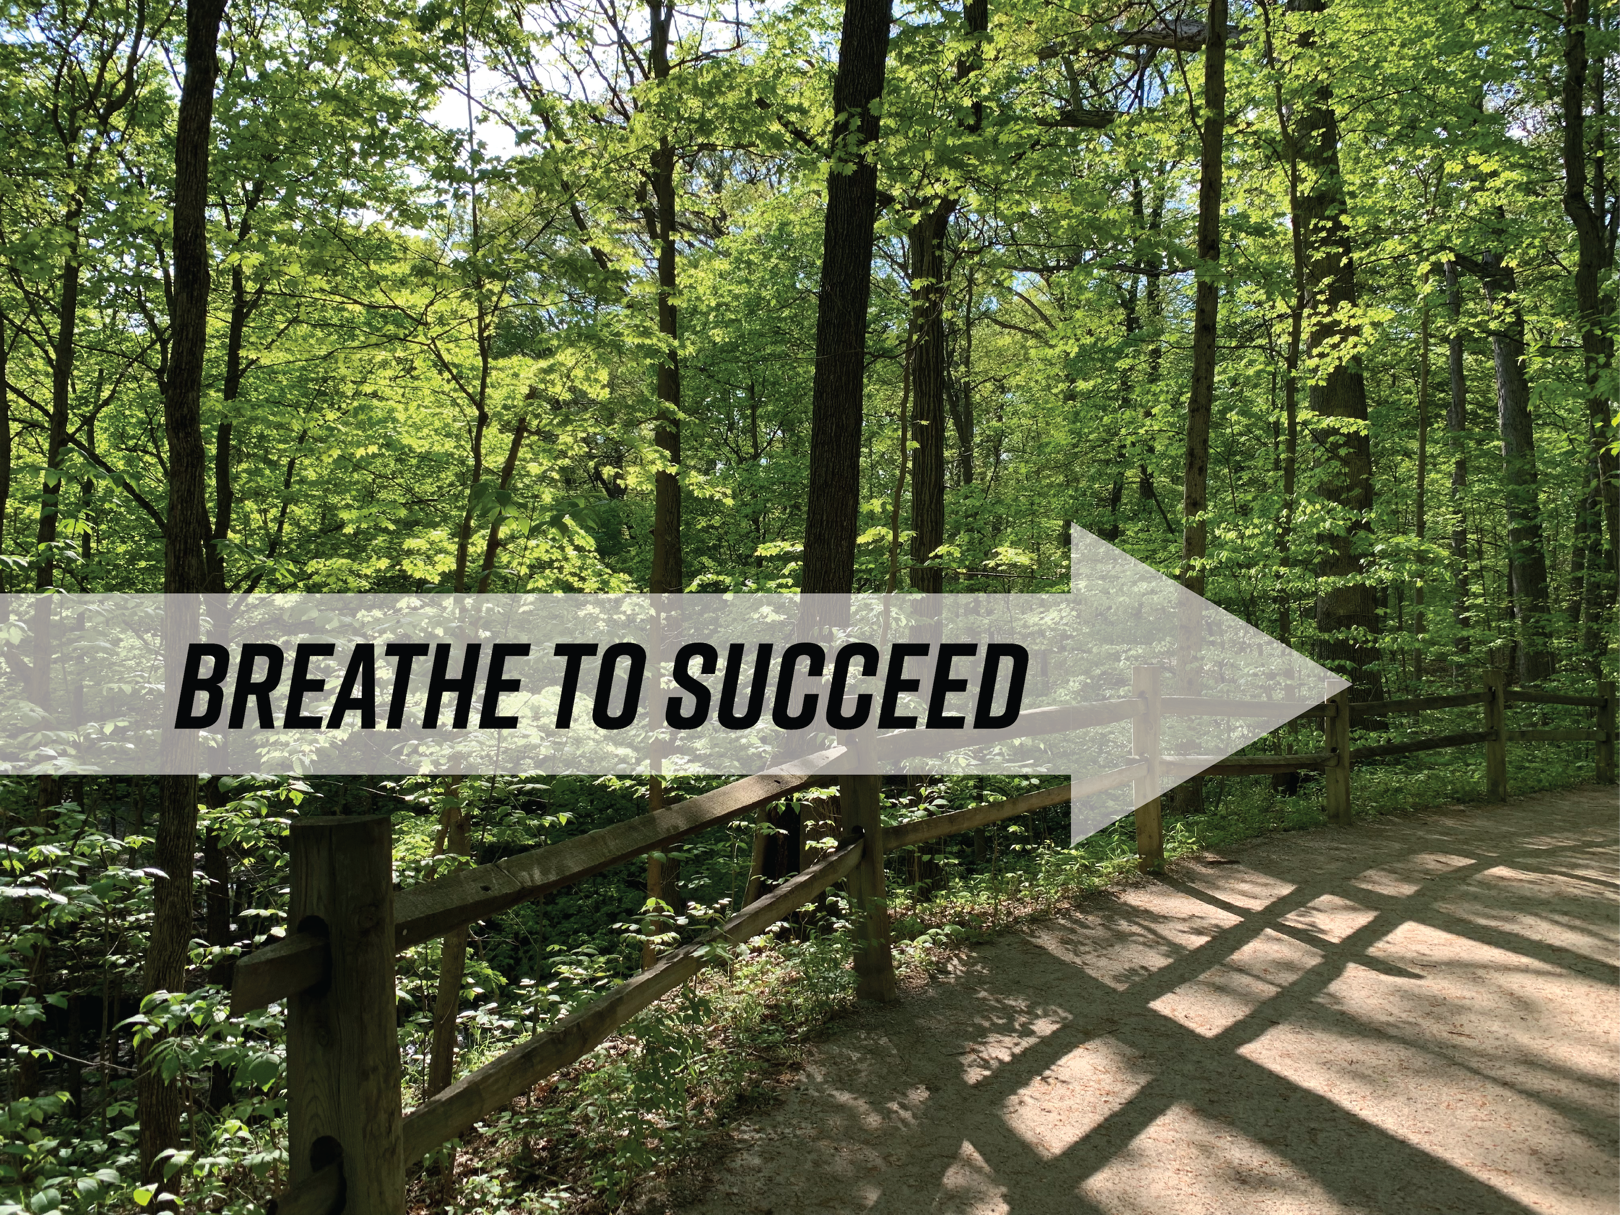 breathe to succeed